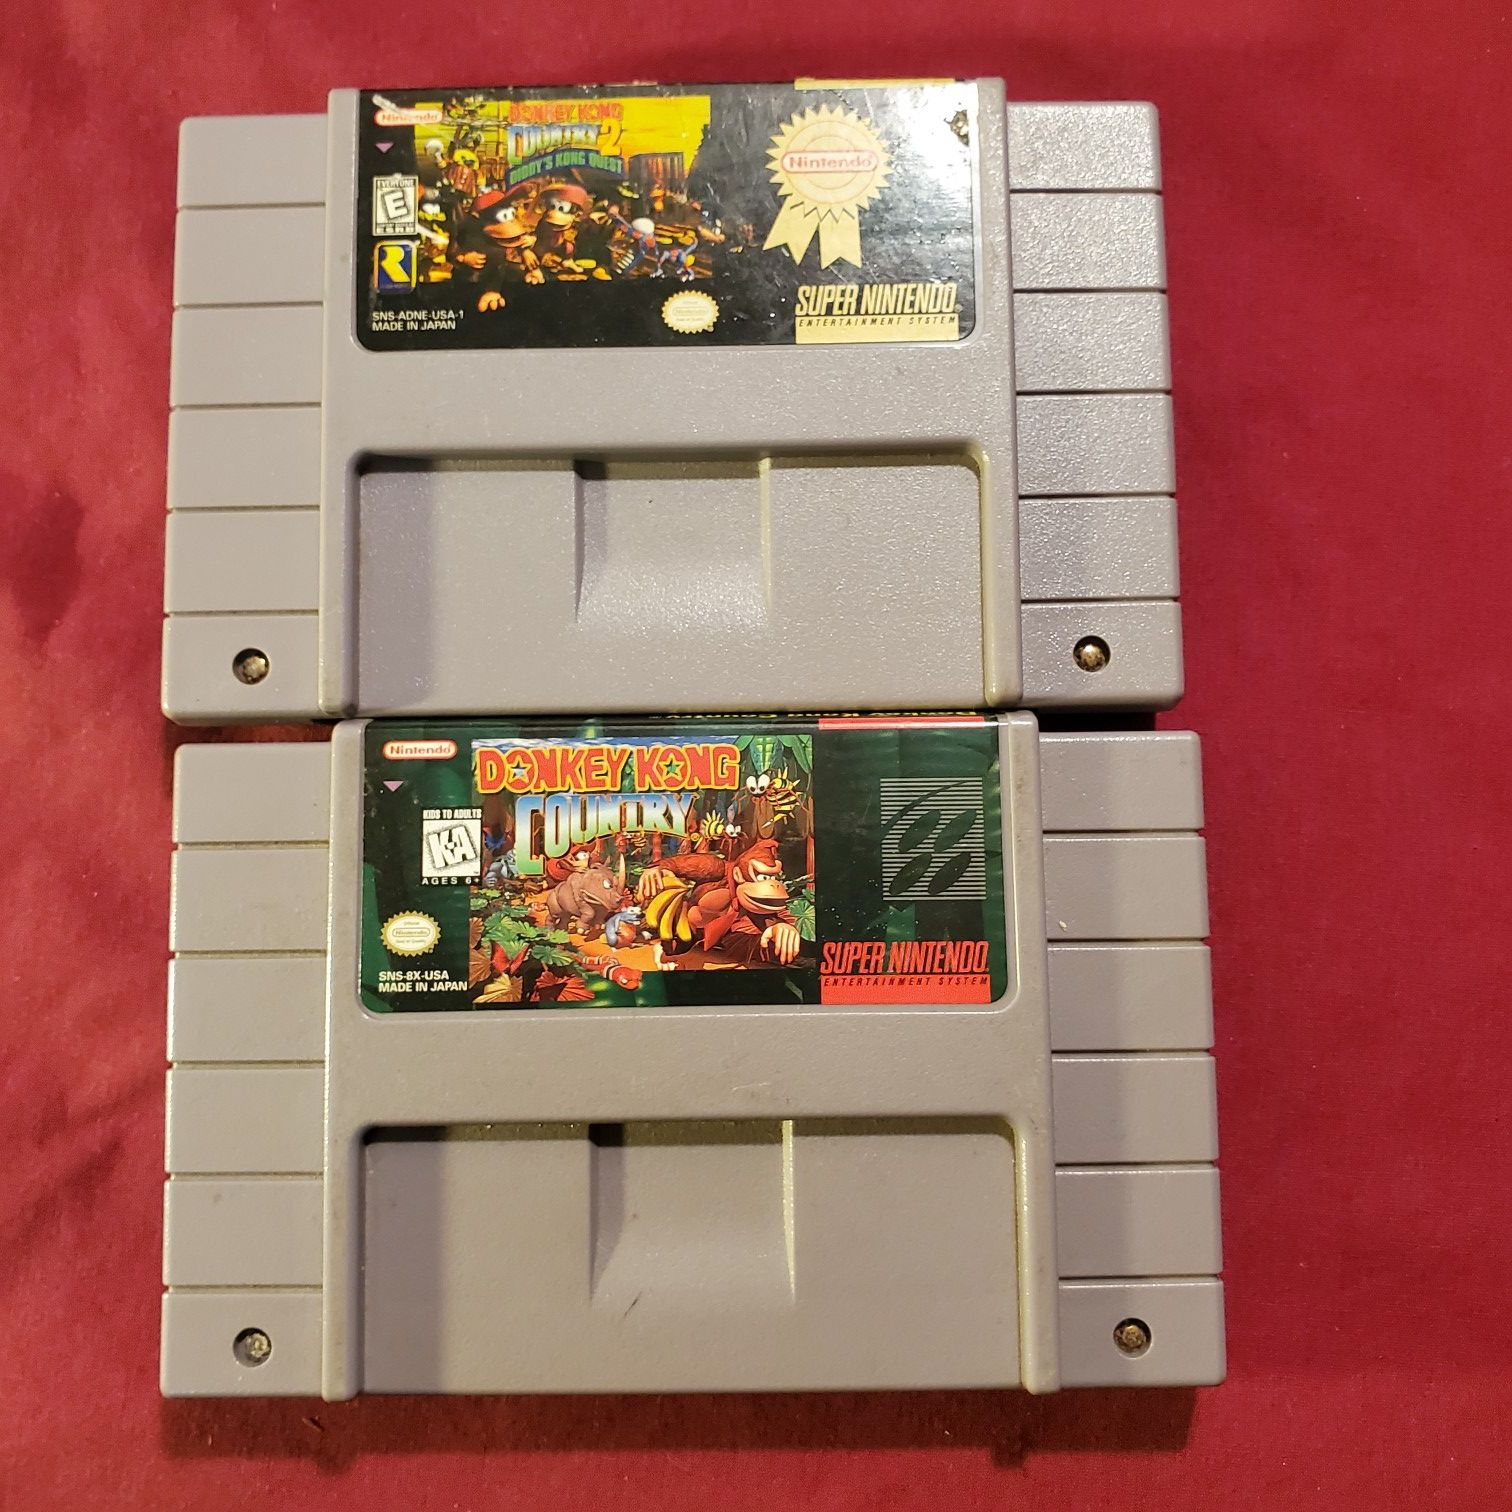 Super Nintendo Donkey Kong Country and Donkey Kong country 2